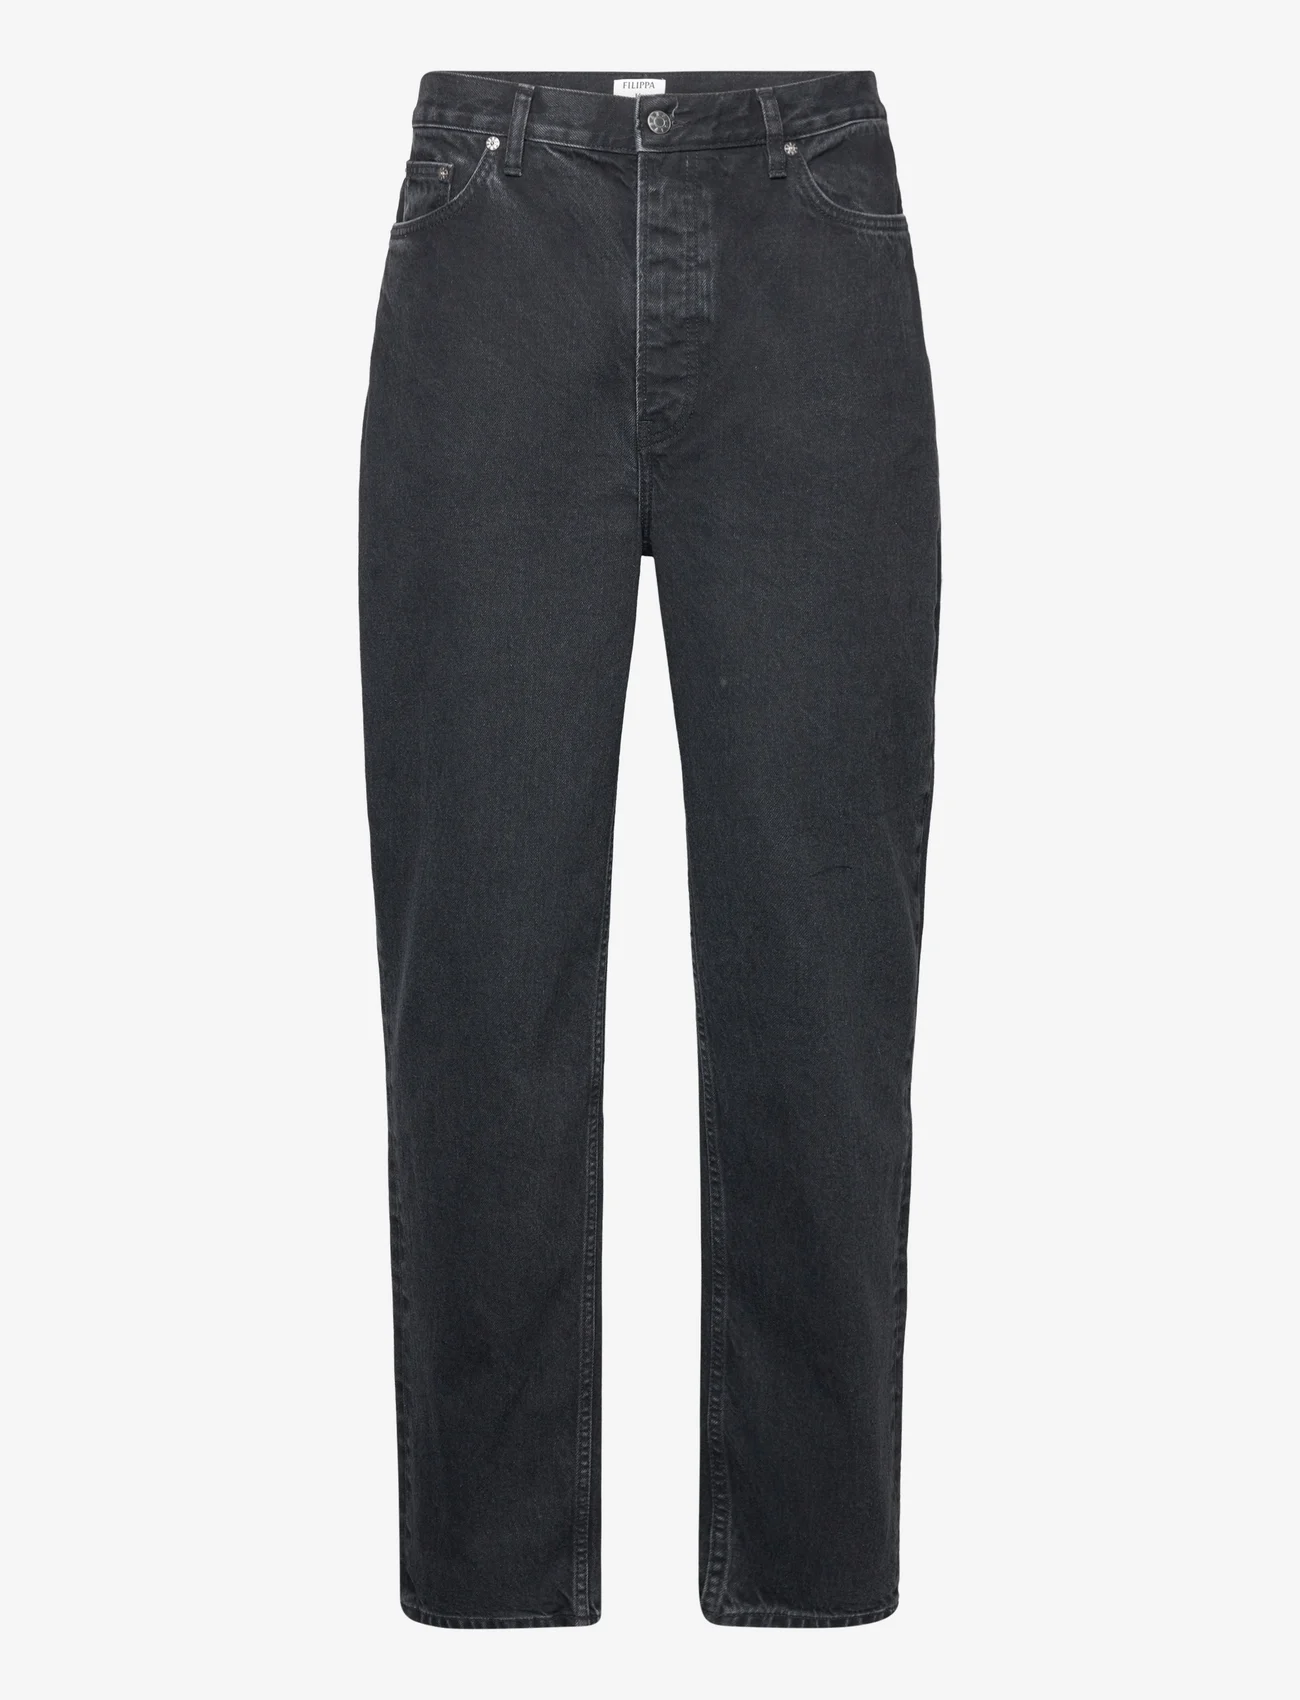 Filippa K - Baggy Tapered Jeans - tapered jeans - charcoal b - 0